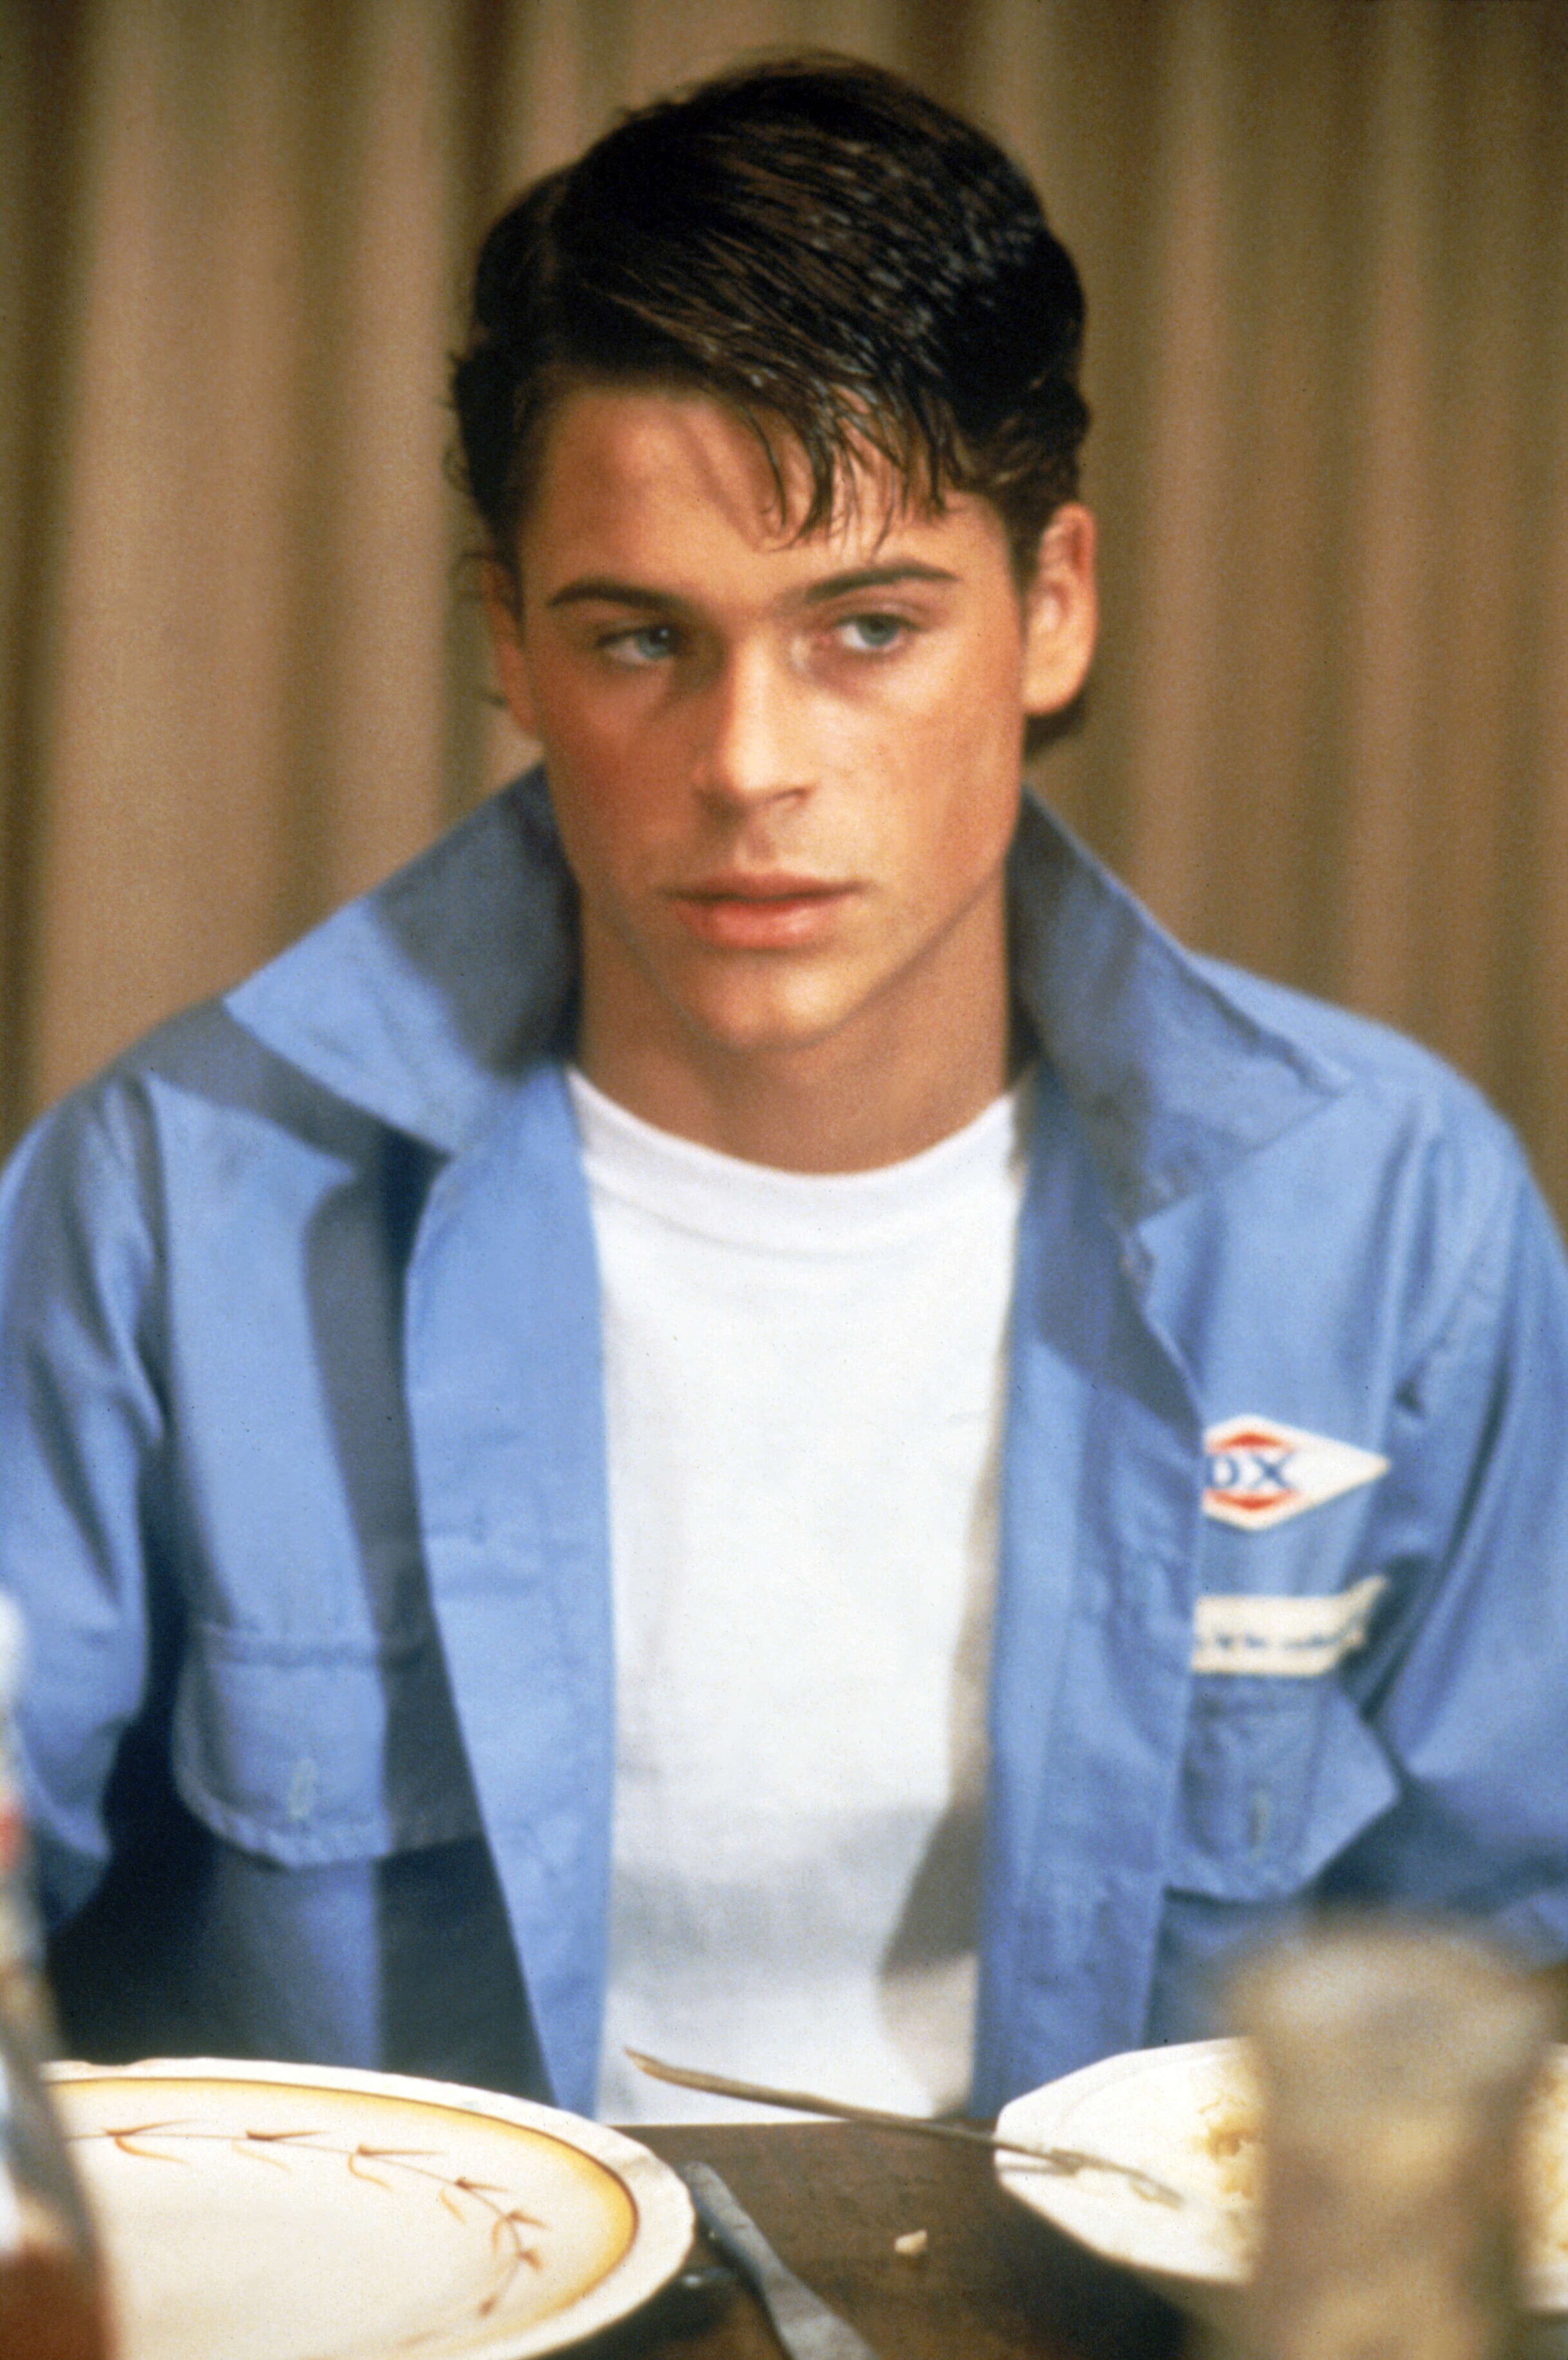 Rob Lowe on the set of The Outsiders, circa 1980s | Source: Getty Images